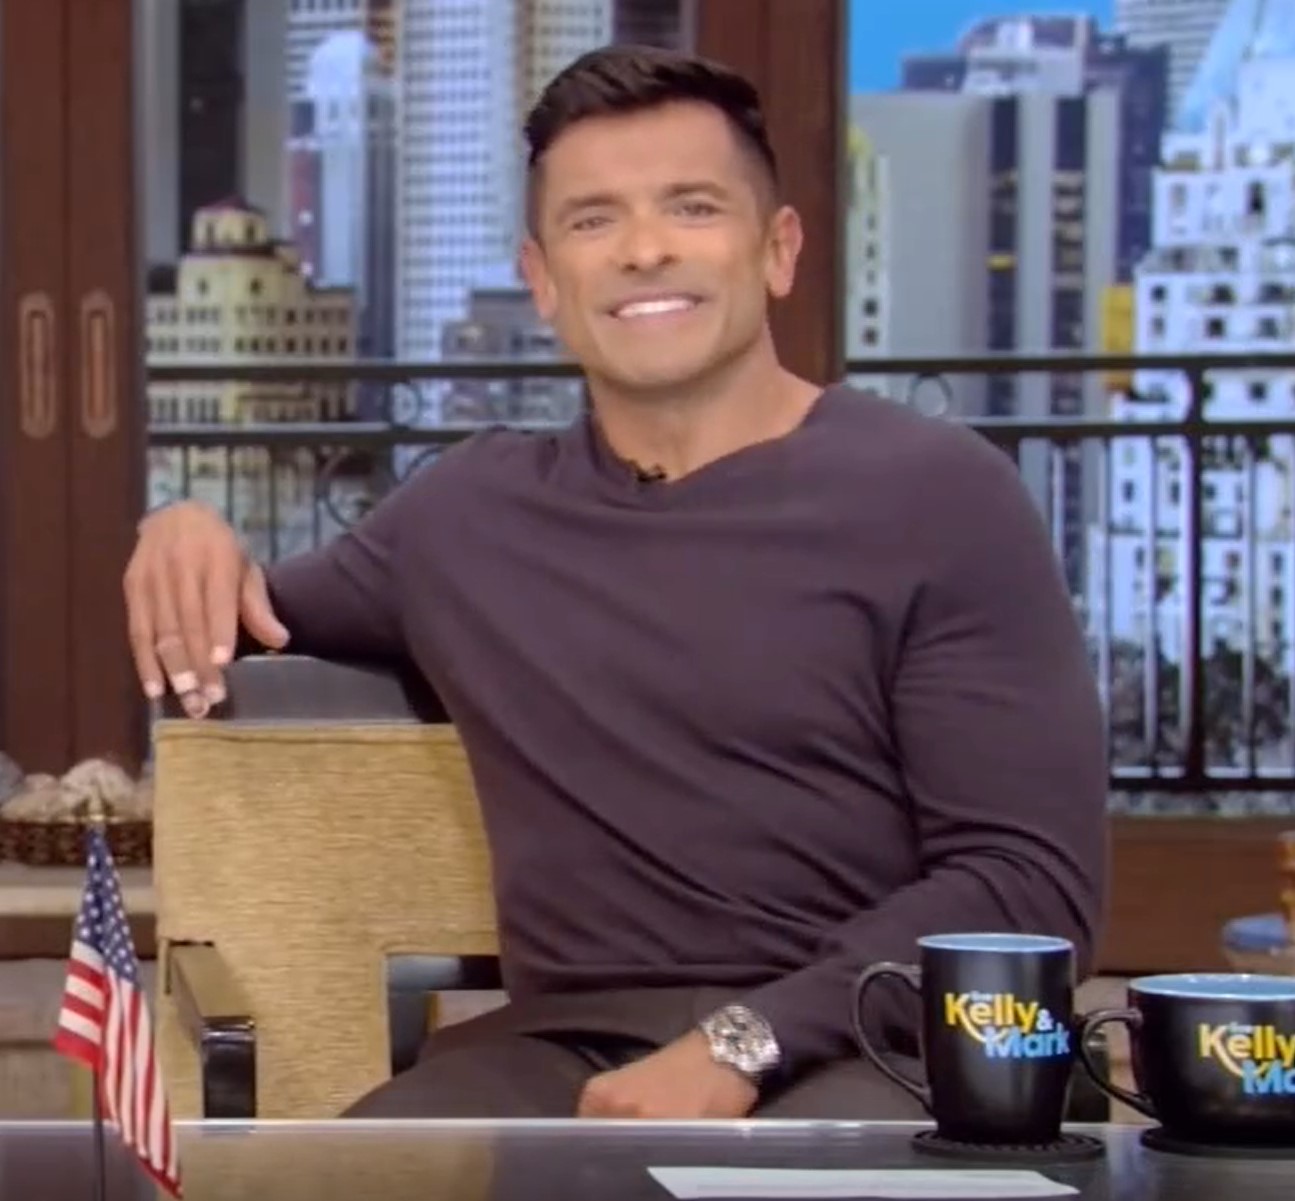 While discussing various topics, Mark Consuelos read an article about adults living with their parents